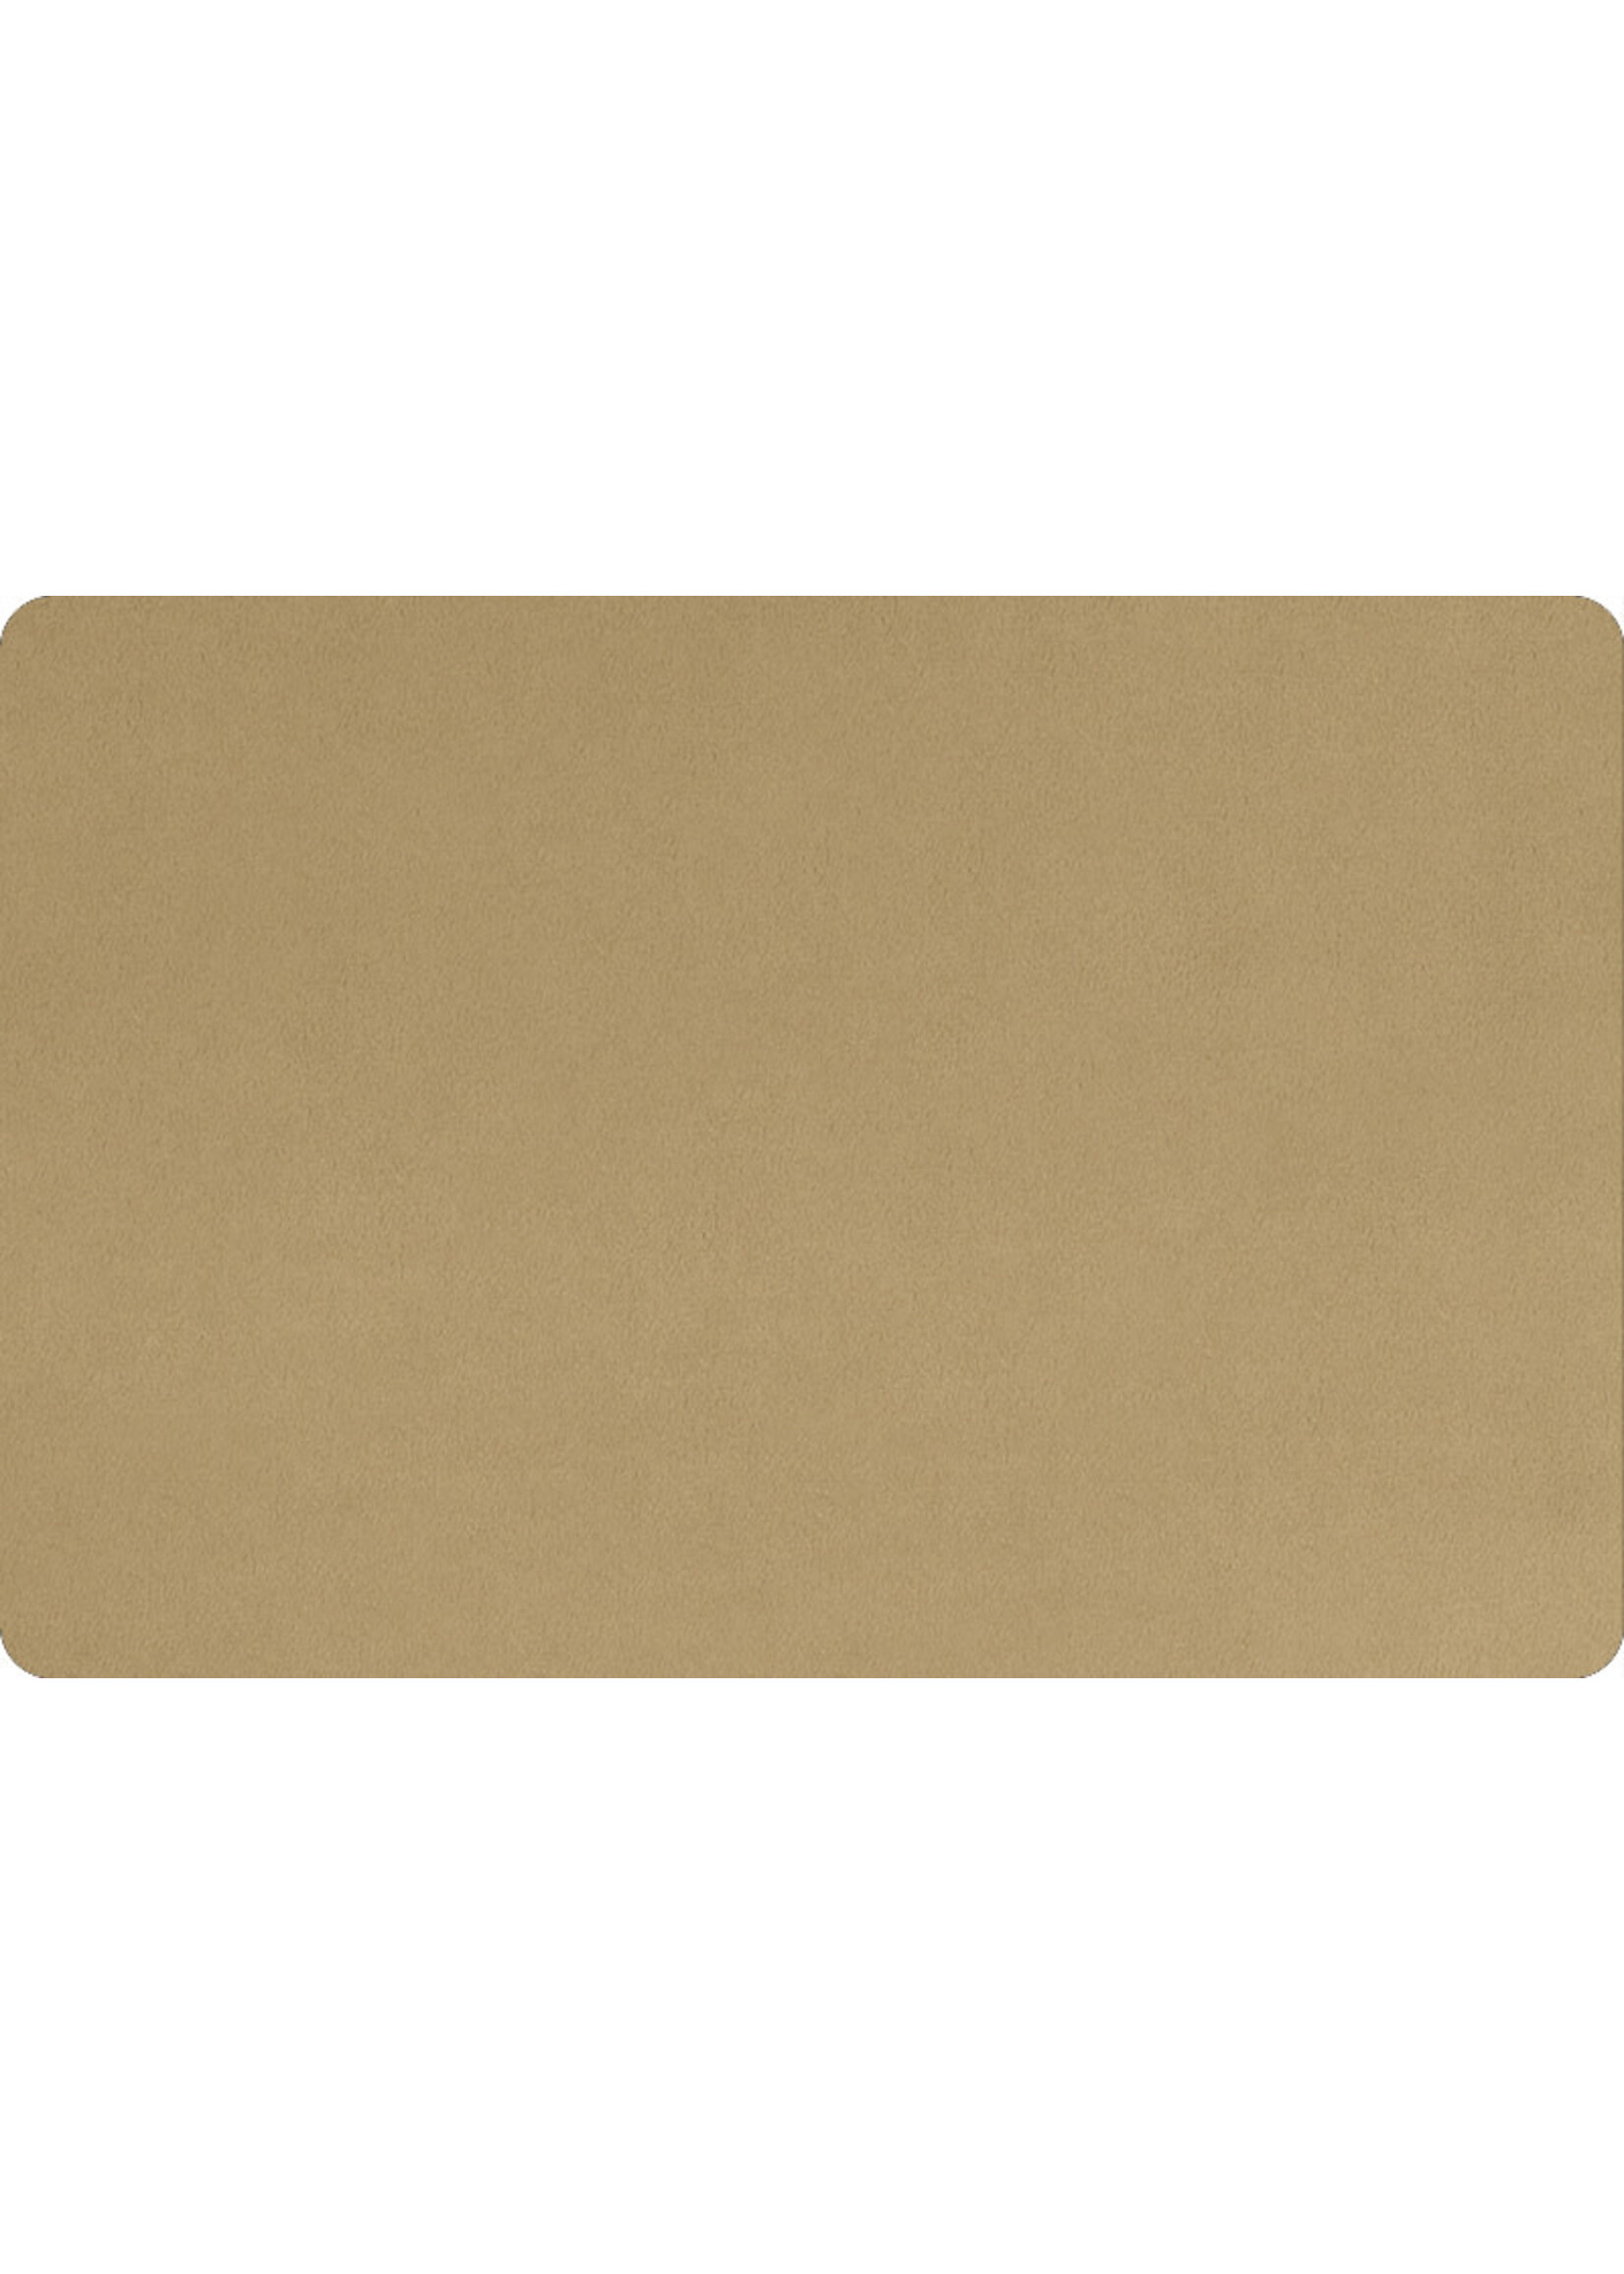 Shannon Fabrics Minky, Extra Wide Solid Cuddle3, 90" Sand, (by the inch)